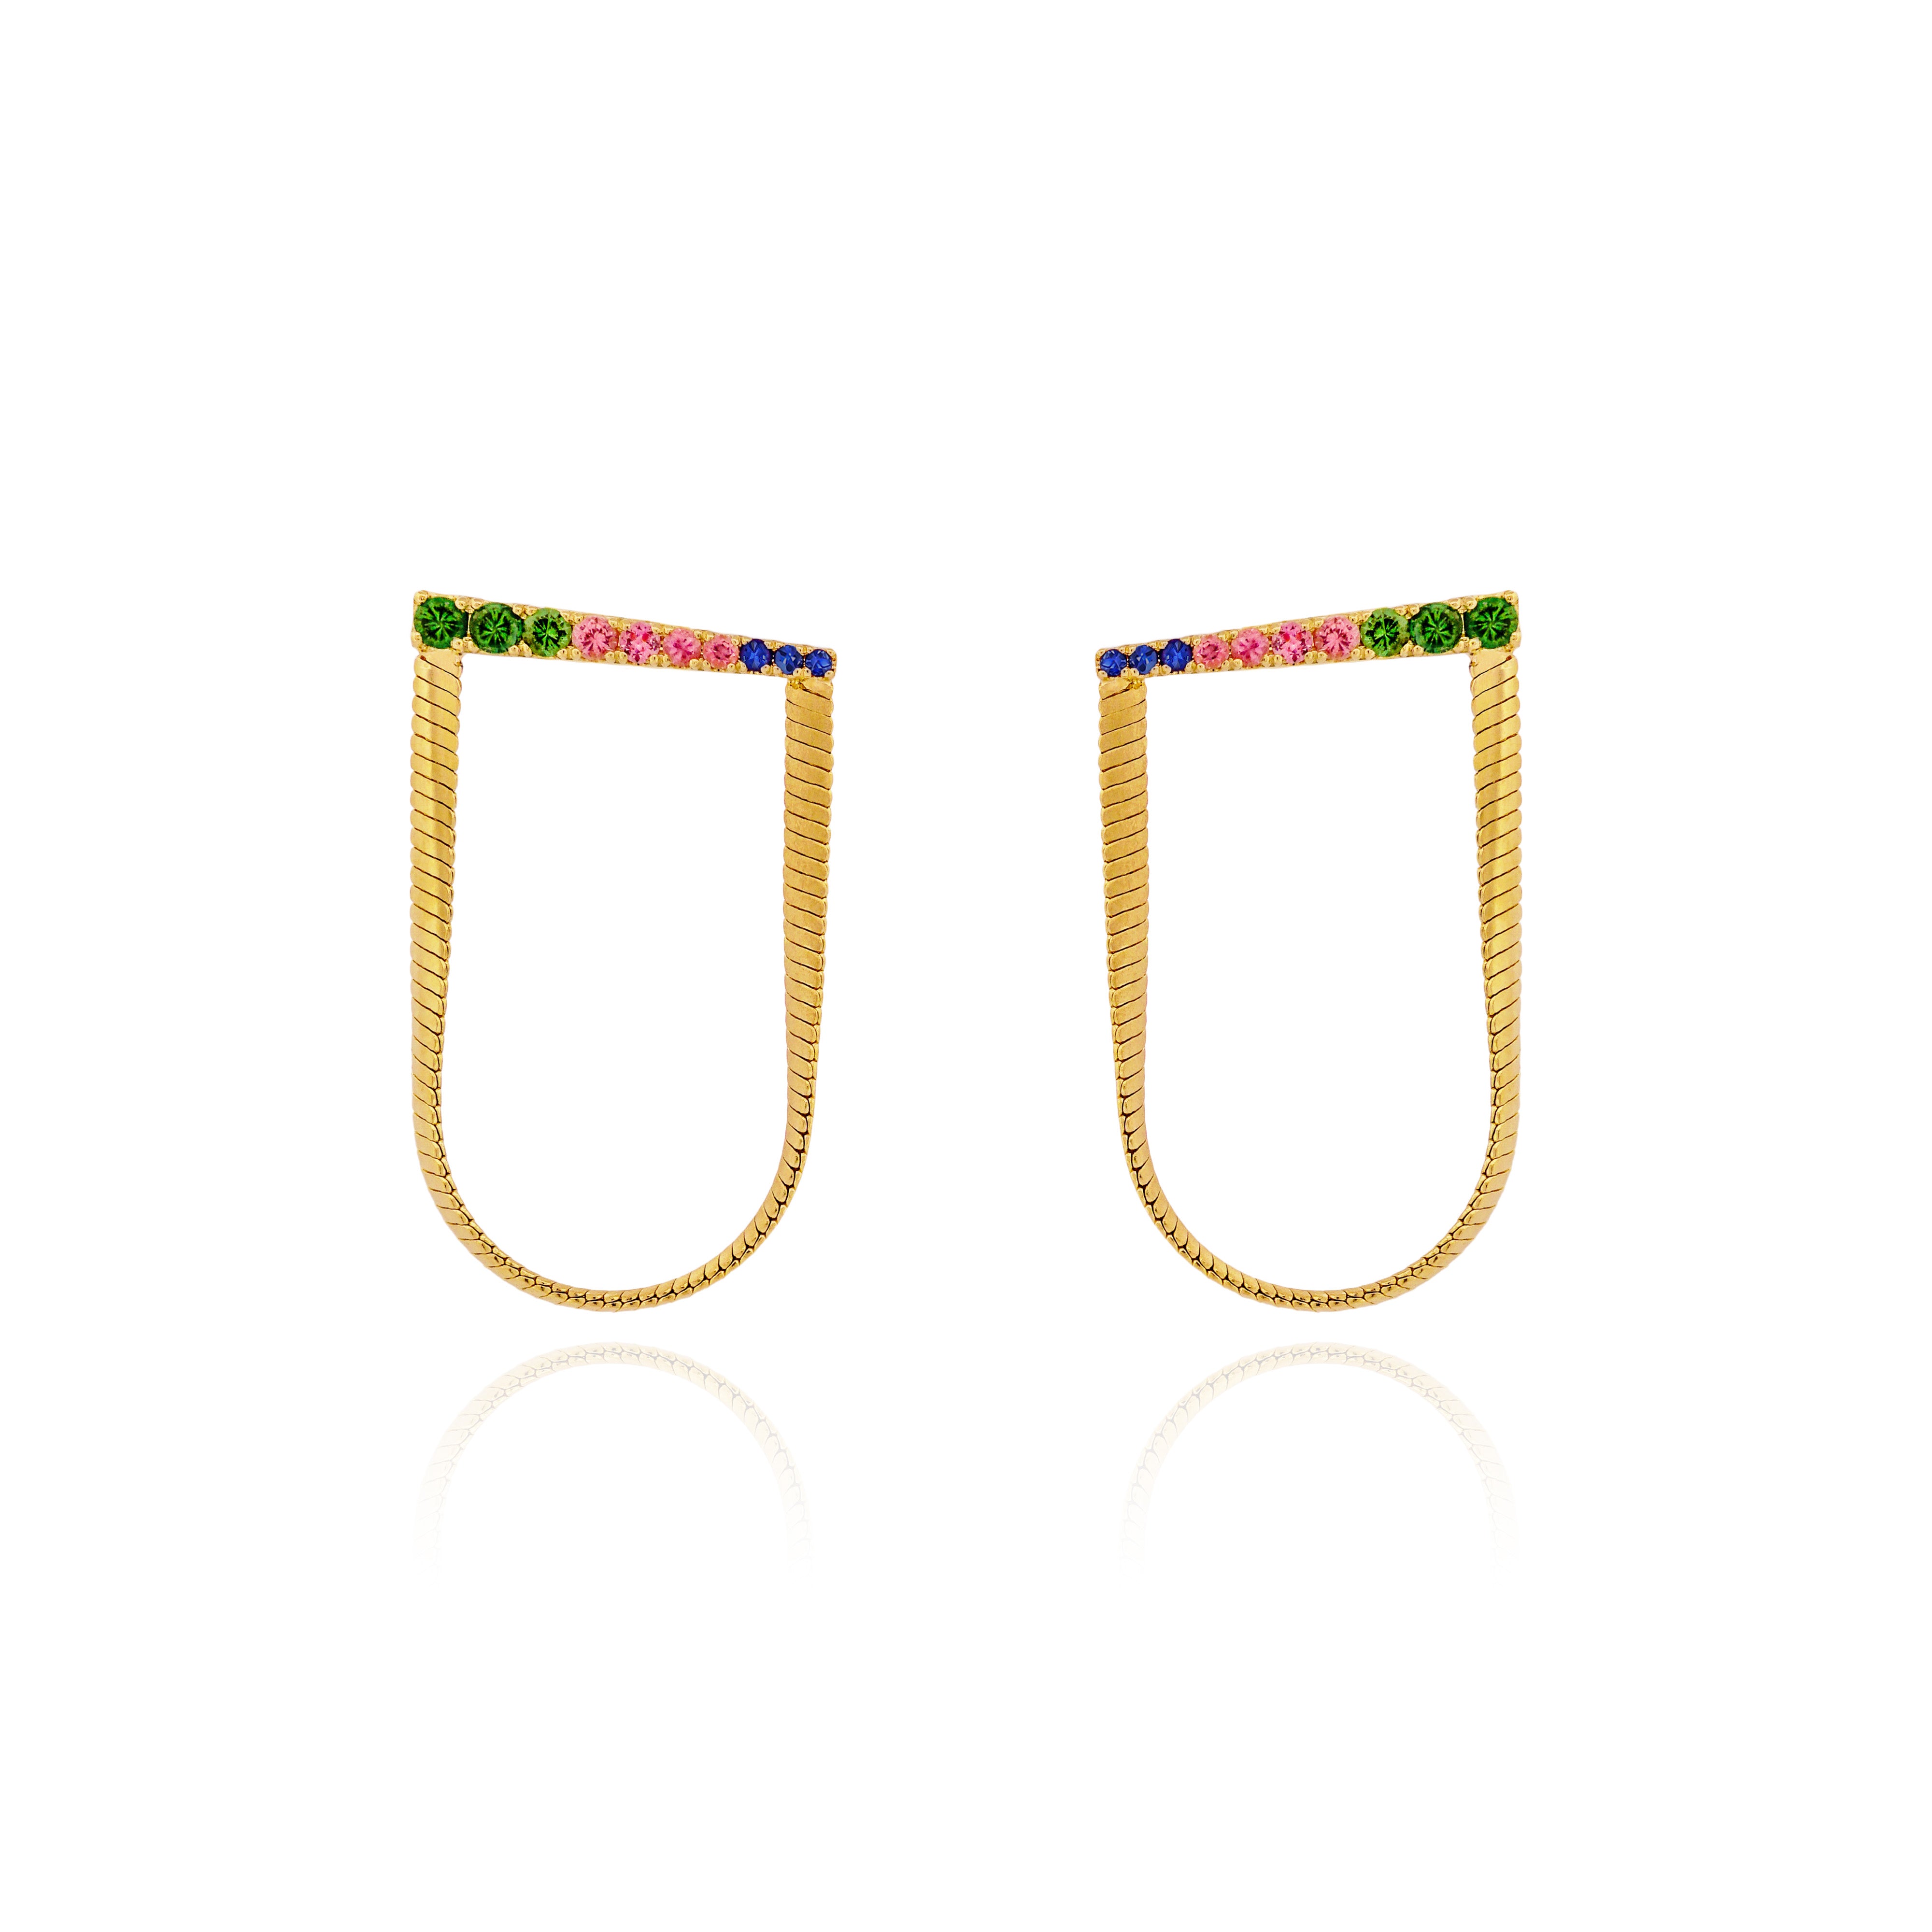 Earrings with Yellow Gold snake chain draped from rod of Emeralds and Pink and Blue Sapphires, Large